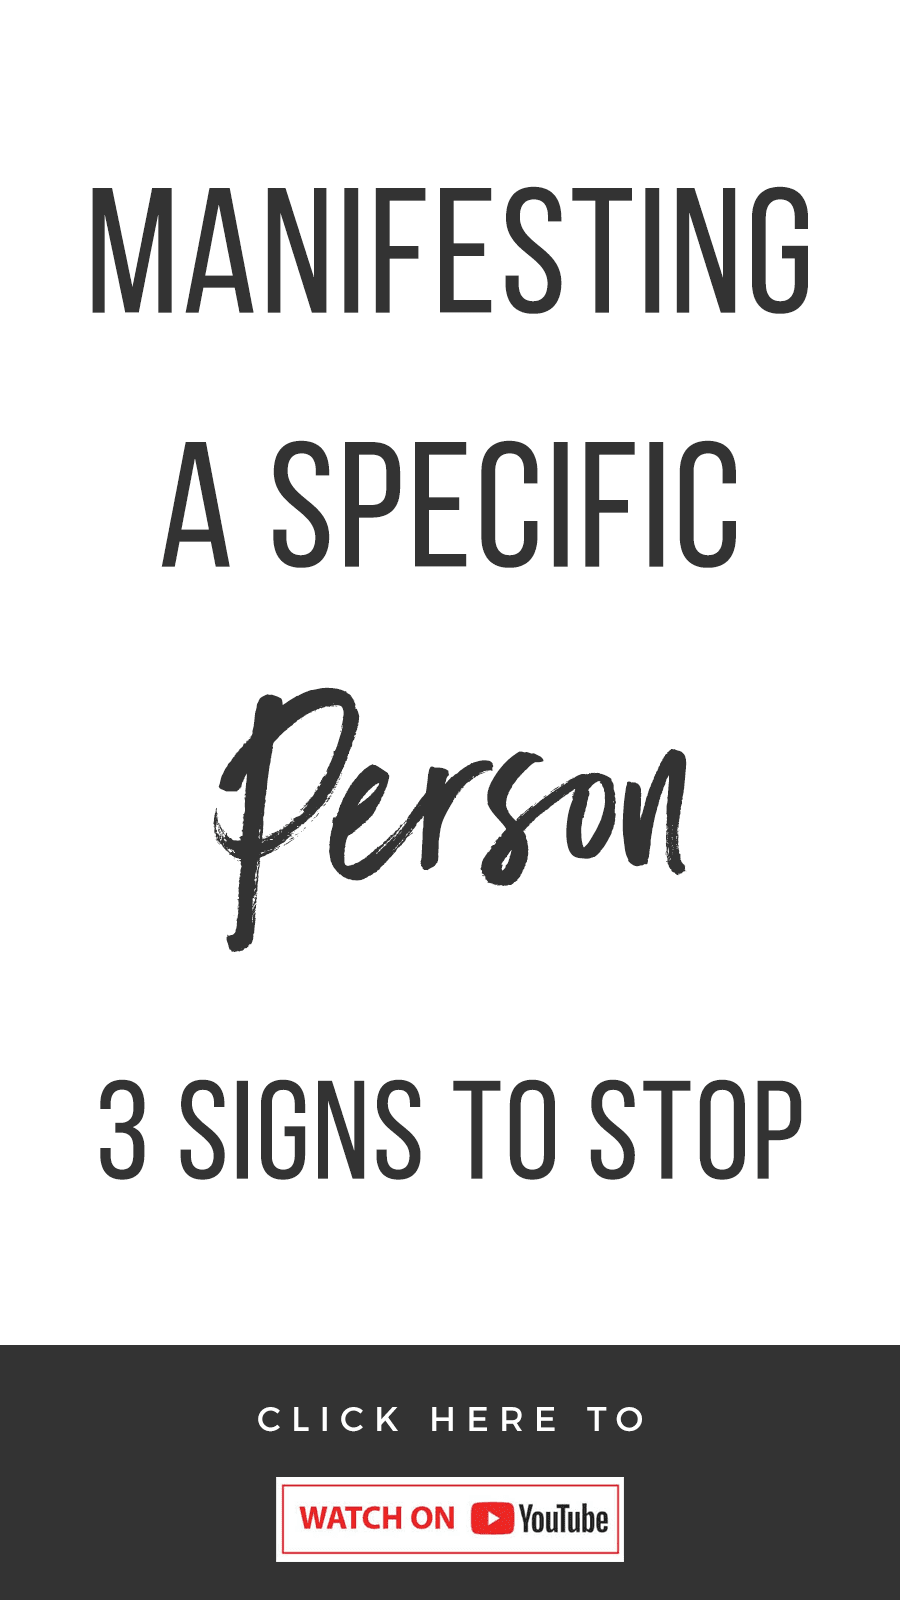 Manifesting A Specific Person: 3 Signs To Stop